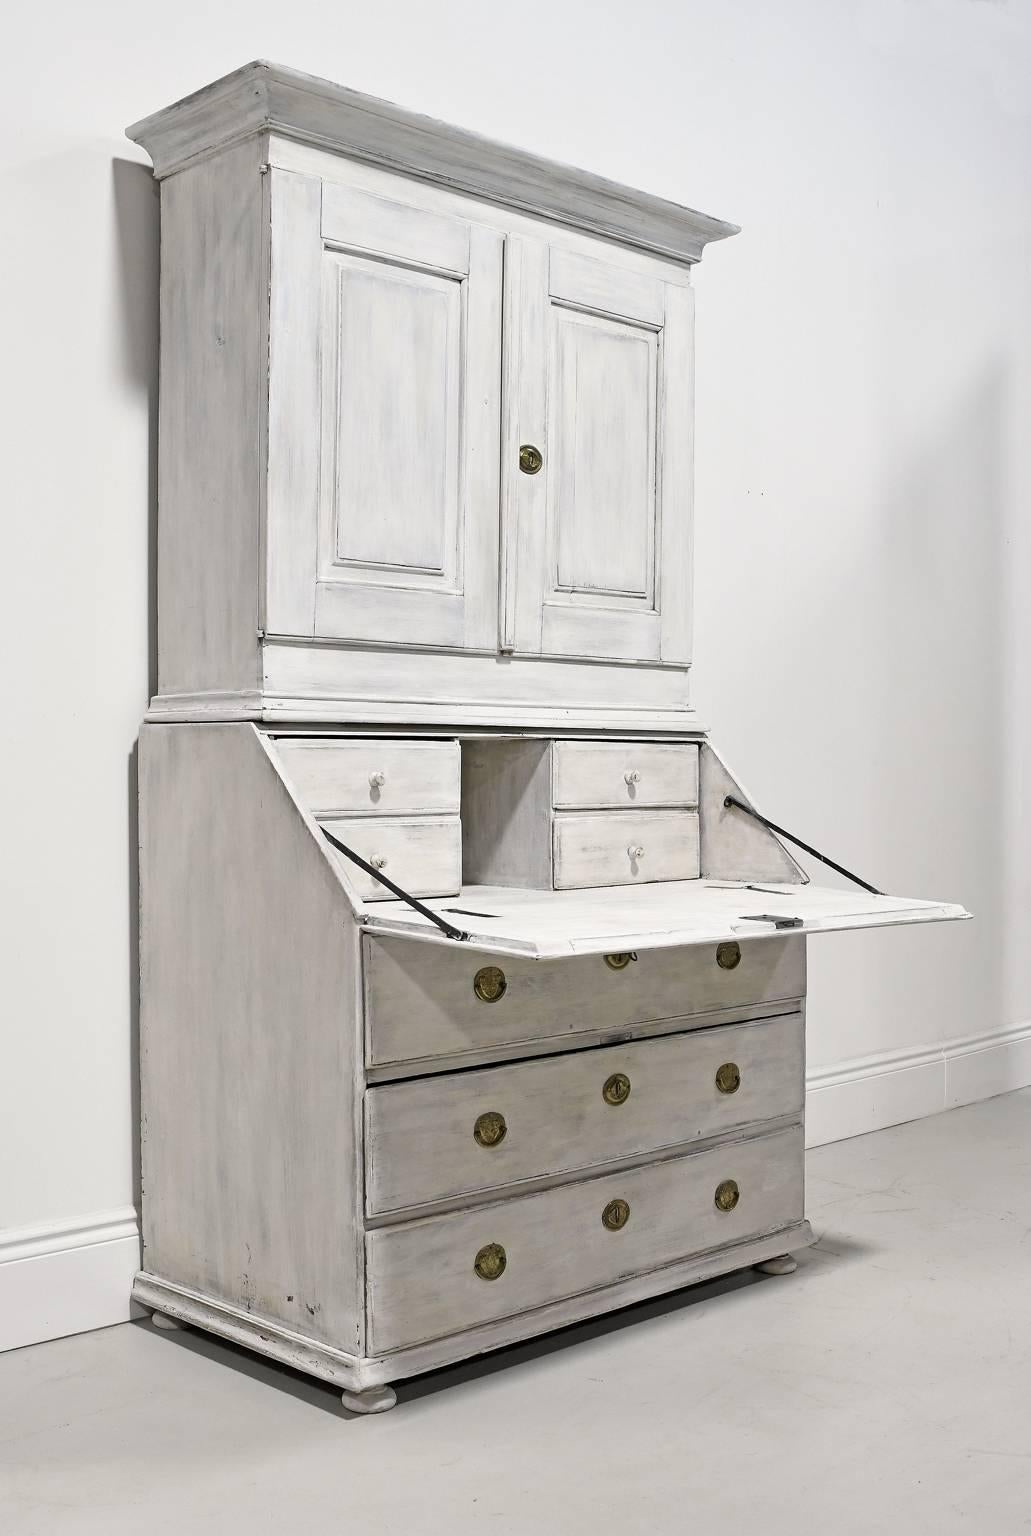 A rustic Swedish Gustavian 18th Century secretary in a grey white milk paint applied over multiple layers of previous finishes features a bookcase/cupboard seated on a fall-front, slant top secretary that opens to a desk with a cubby and four small